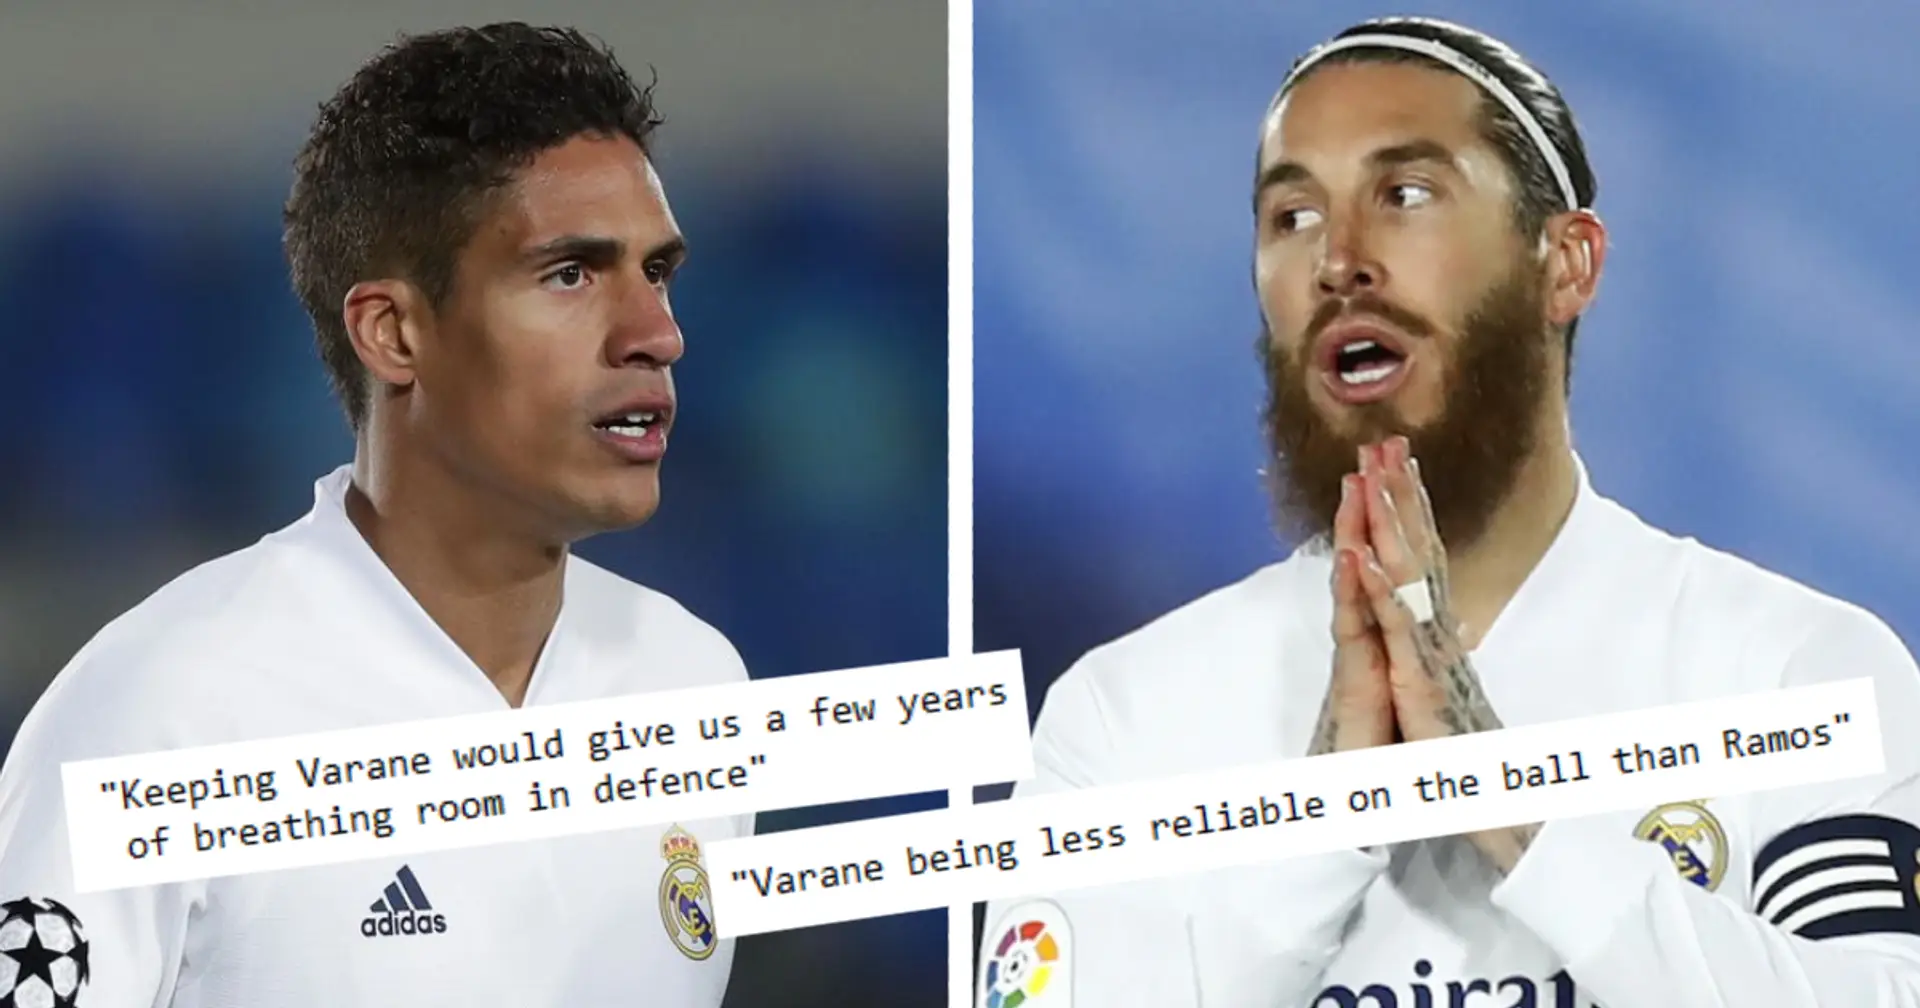 Ramos or Varane? Fans share their arguments over who should stay if only one could be kept